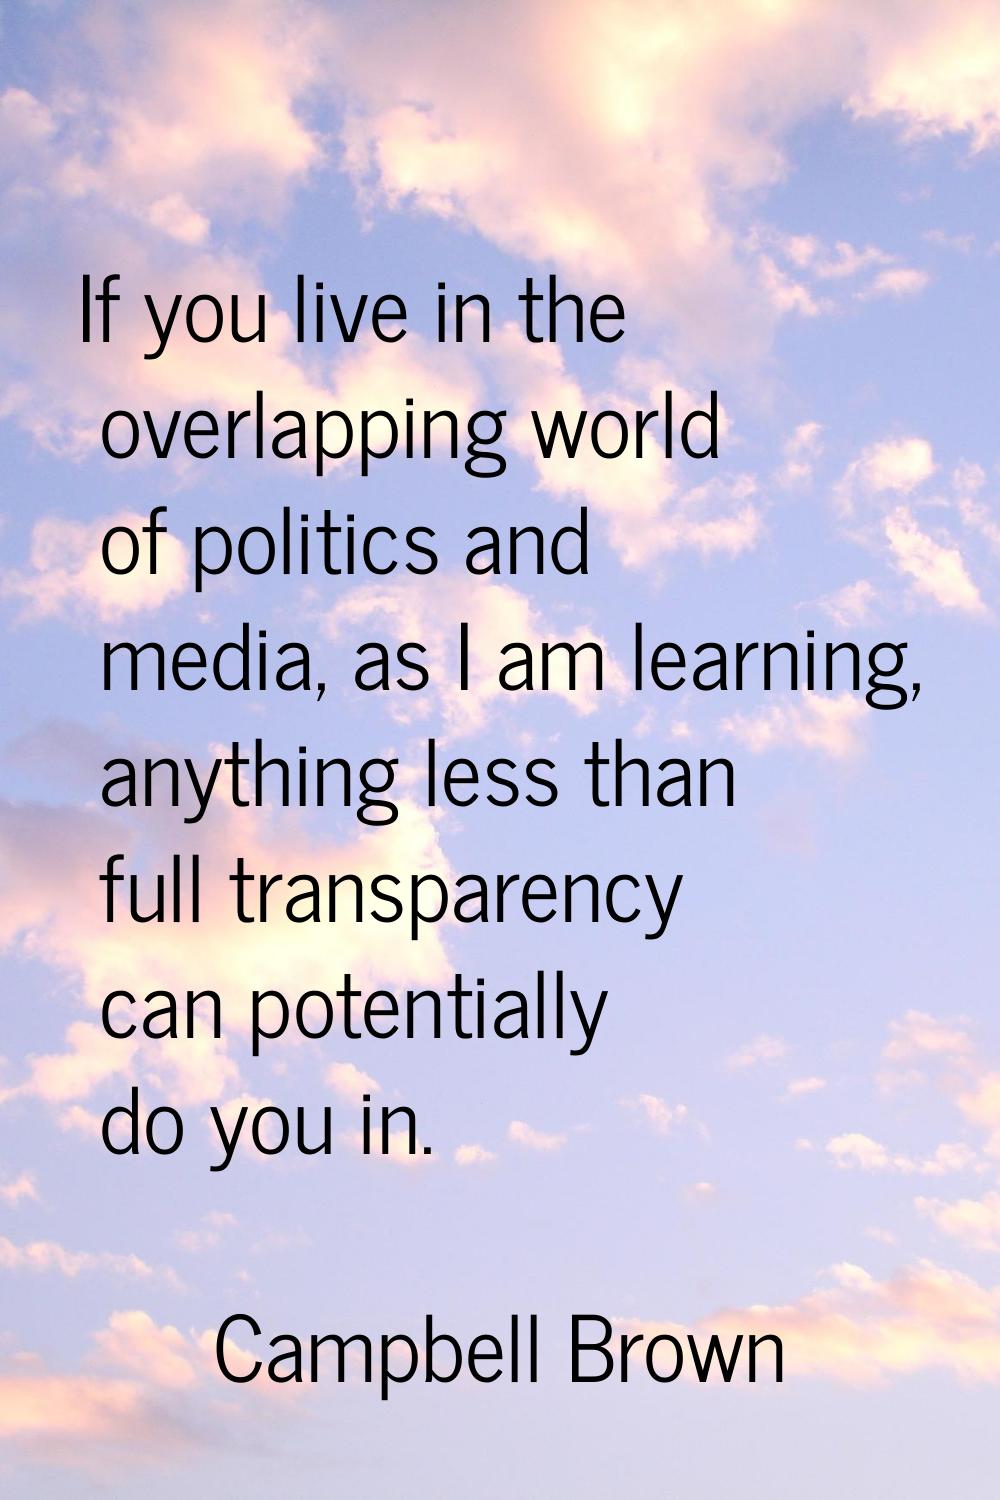 If you live in the overlapping world of politics and media, as I am learning, anything less than fu